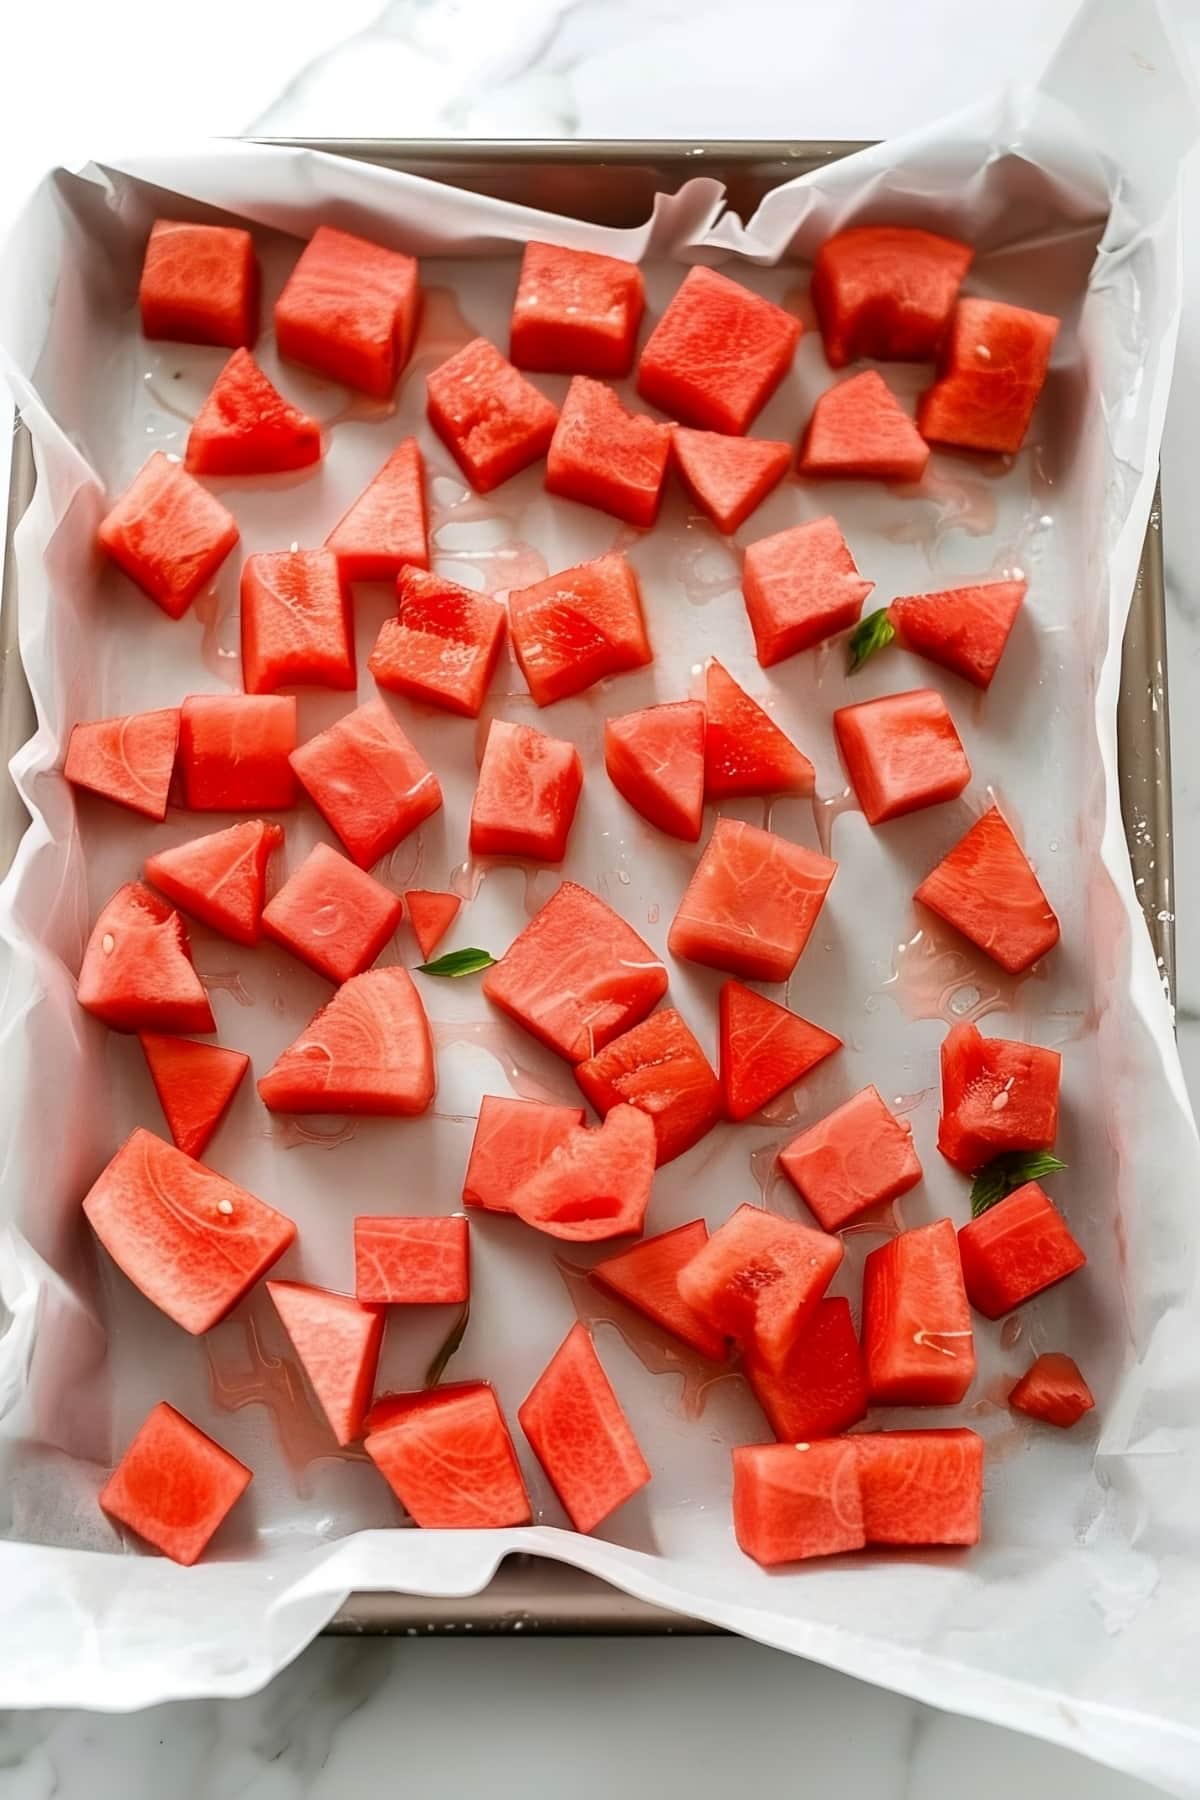 Cubed watermelon in a parchment-lined baking tray